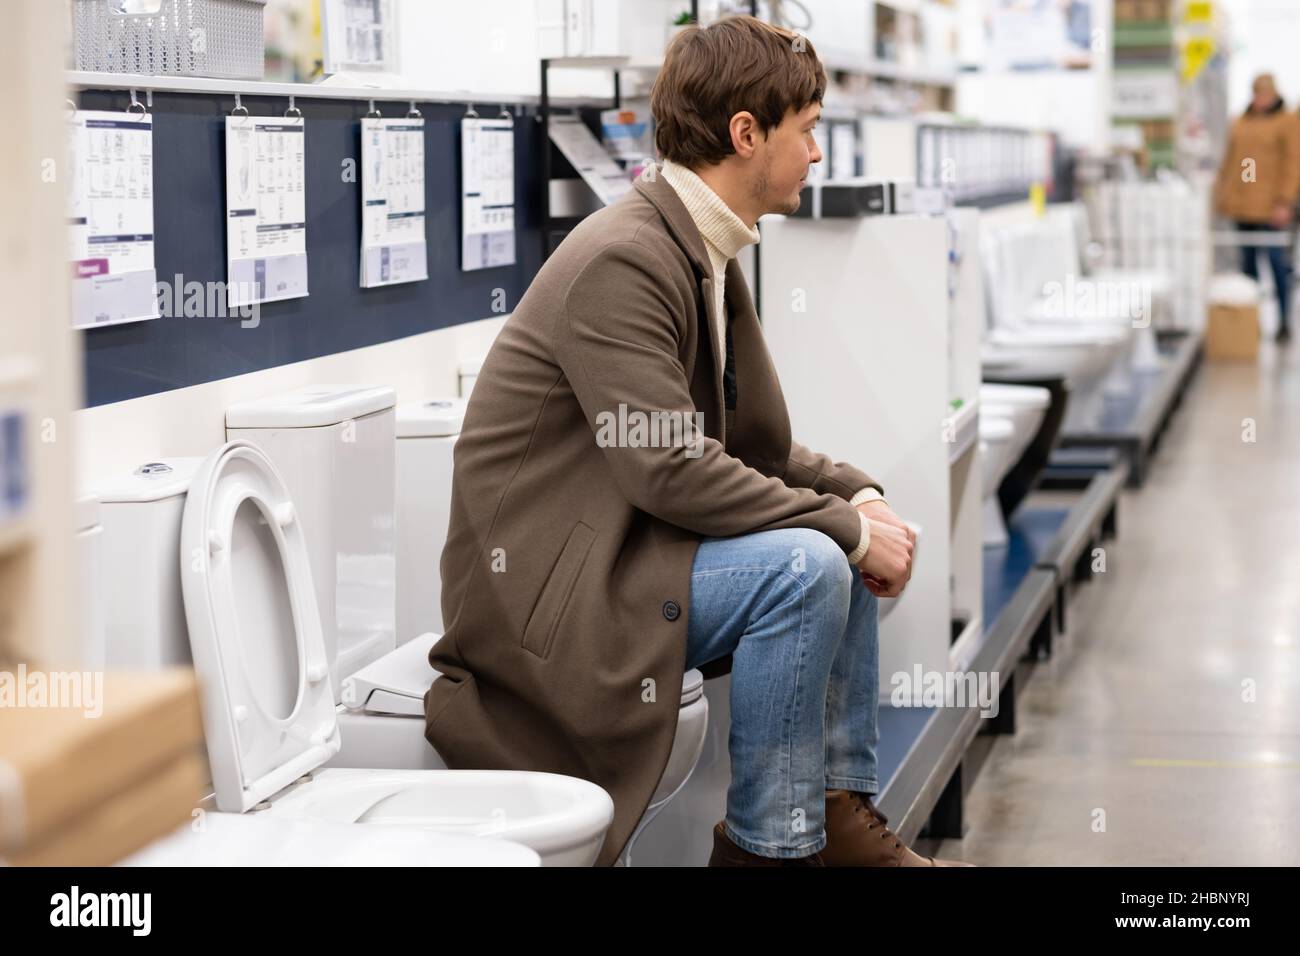 European man in a brown coat is sitting on the toilet in a hardware store, choosing a toilet for the bathroom during repairs Stock Photo